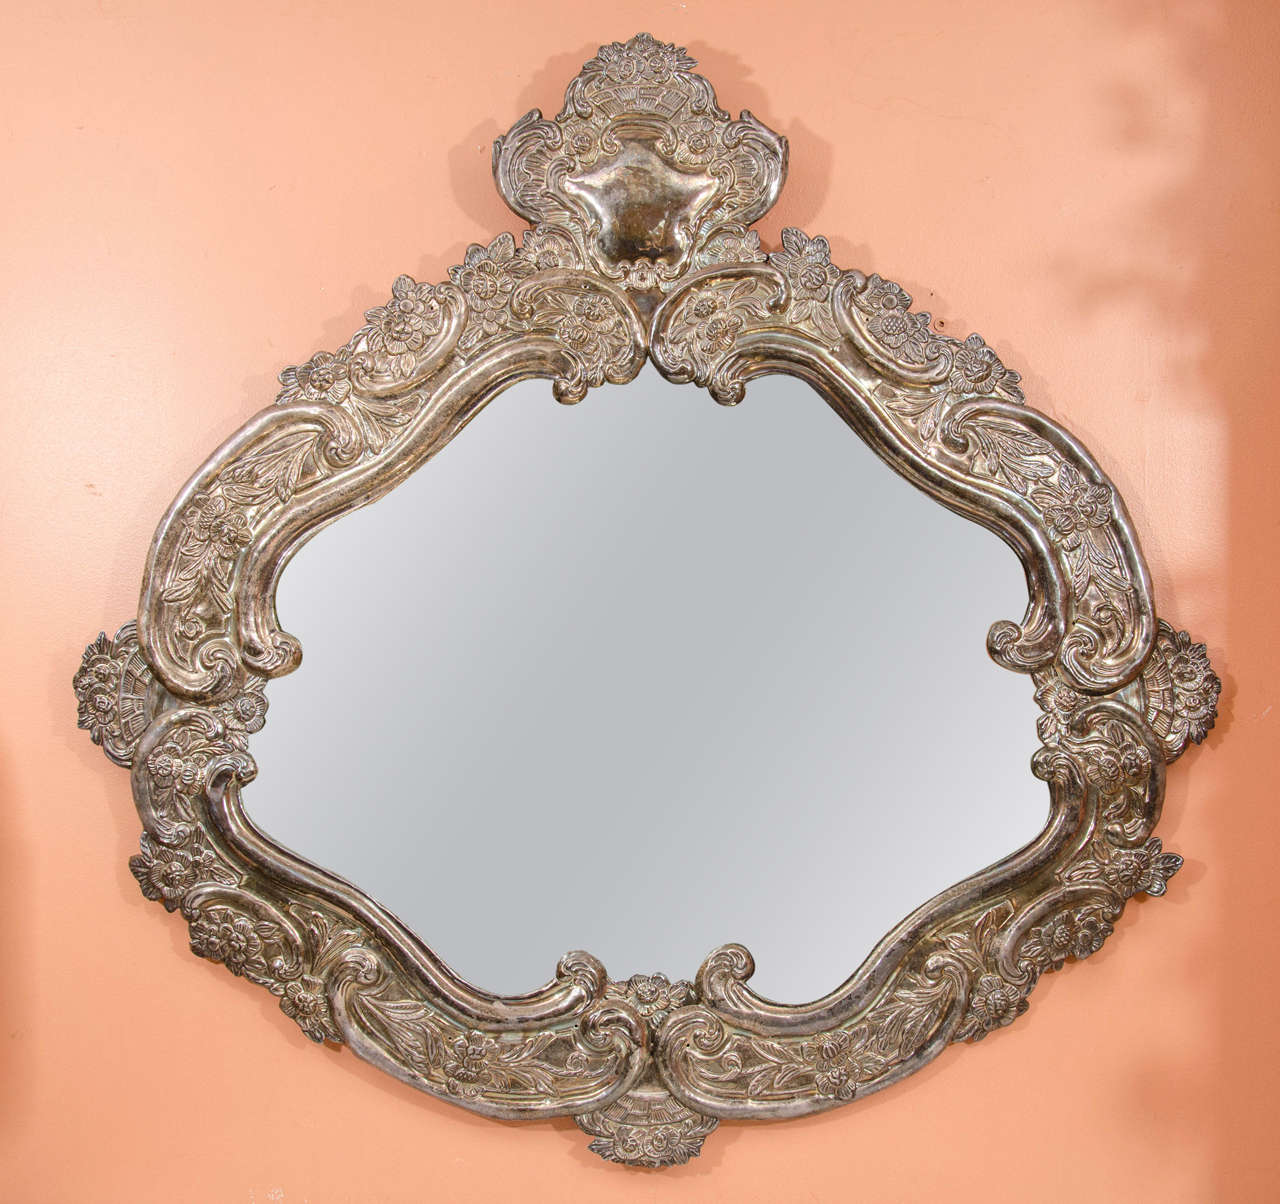 A pair of Portuguese Colonial Baroque silver over brass repousse oval mirrors with C-scroll and floral motifs.